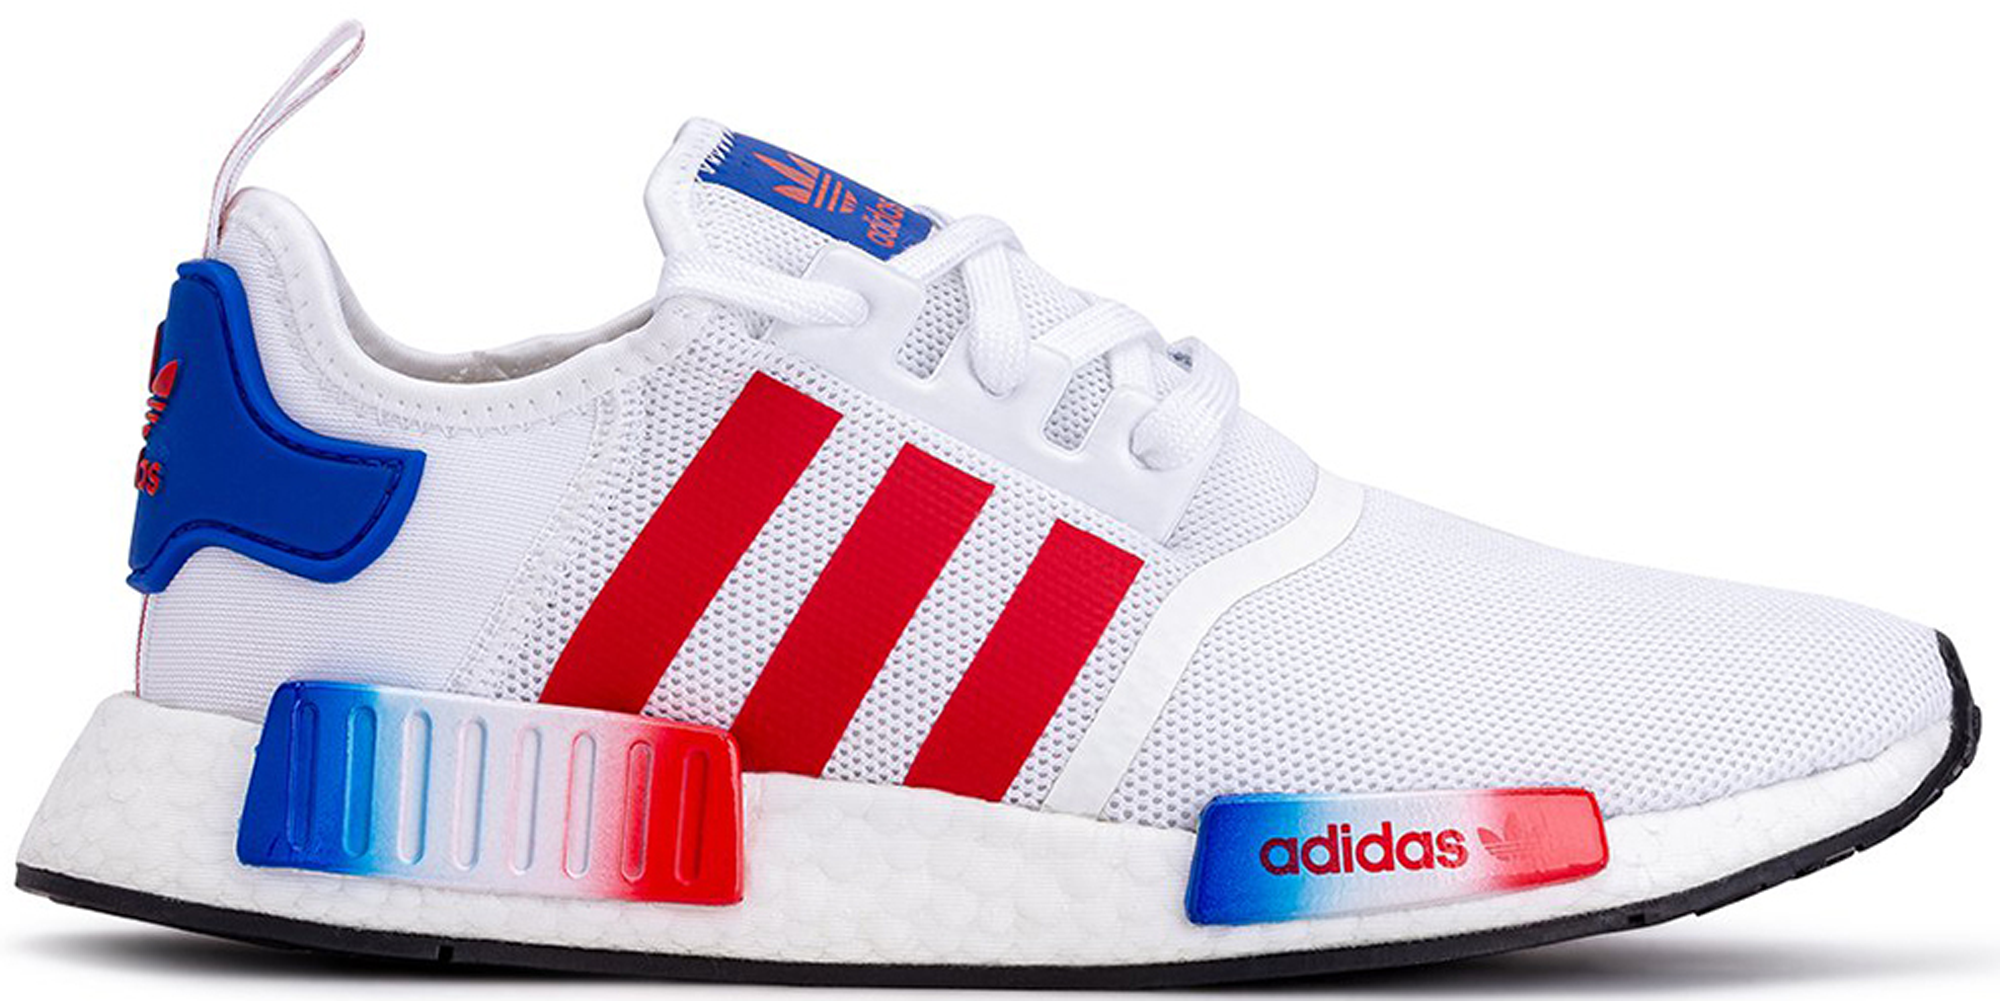 adidas nmds red white and blue